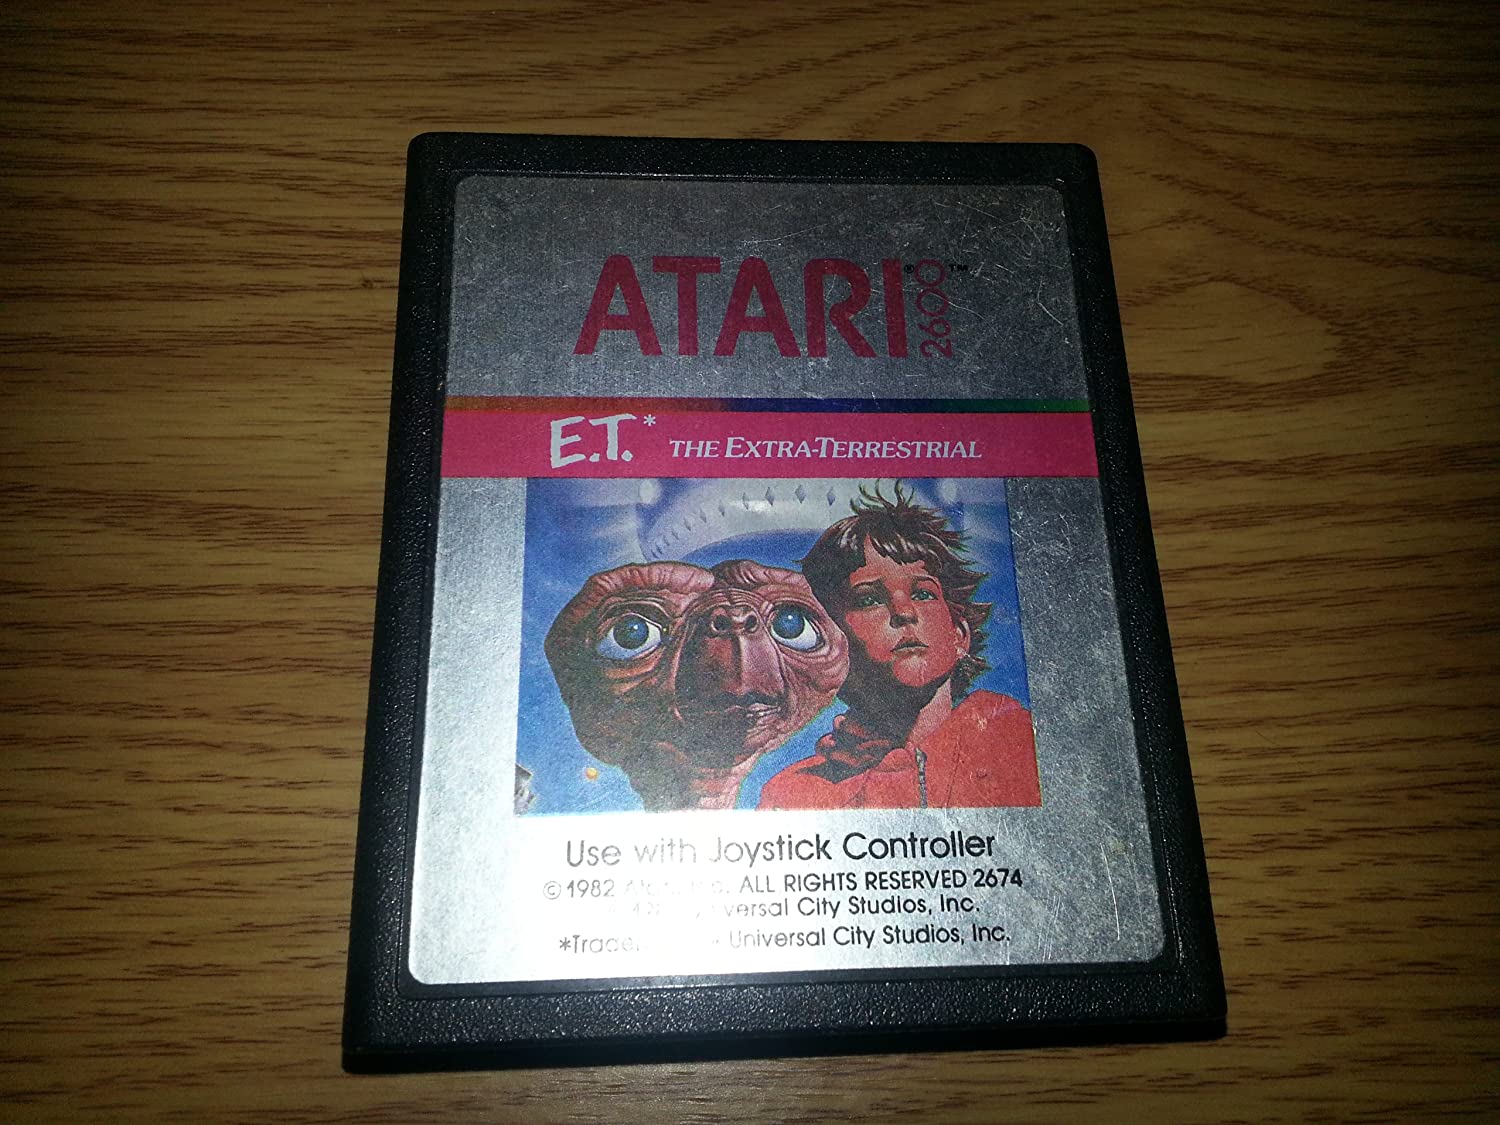 E.T. The Game -  Industry History  - More Cartridges Than Ataris?